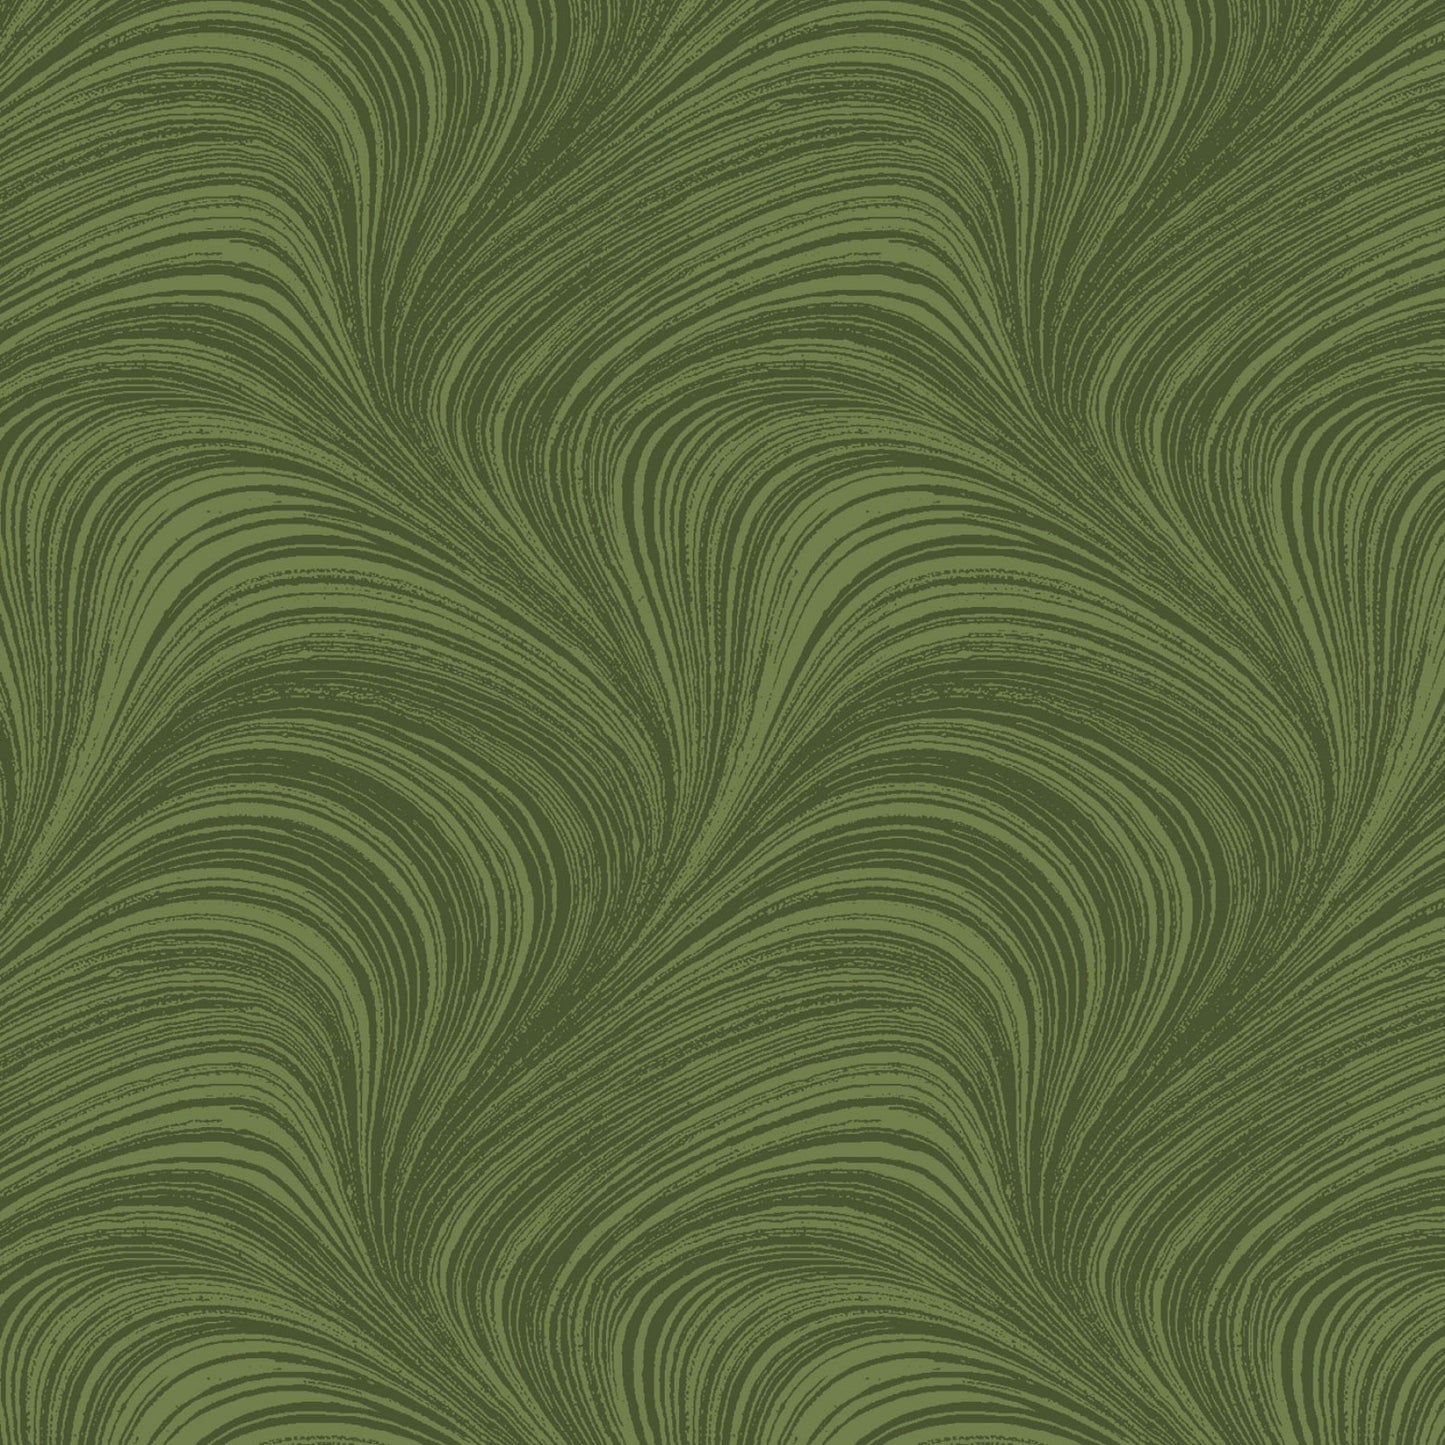 Wave Texture 108" Flannel Quilt by Jackie Robinson - Medium Green - 12966WF- 43 $39.96/m